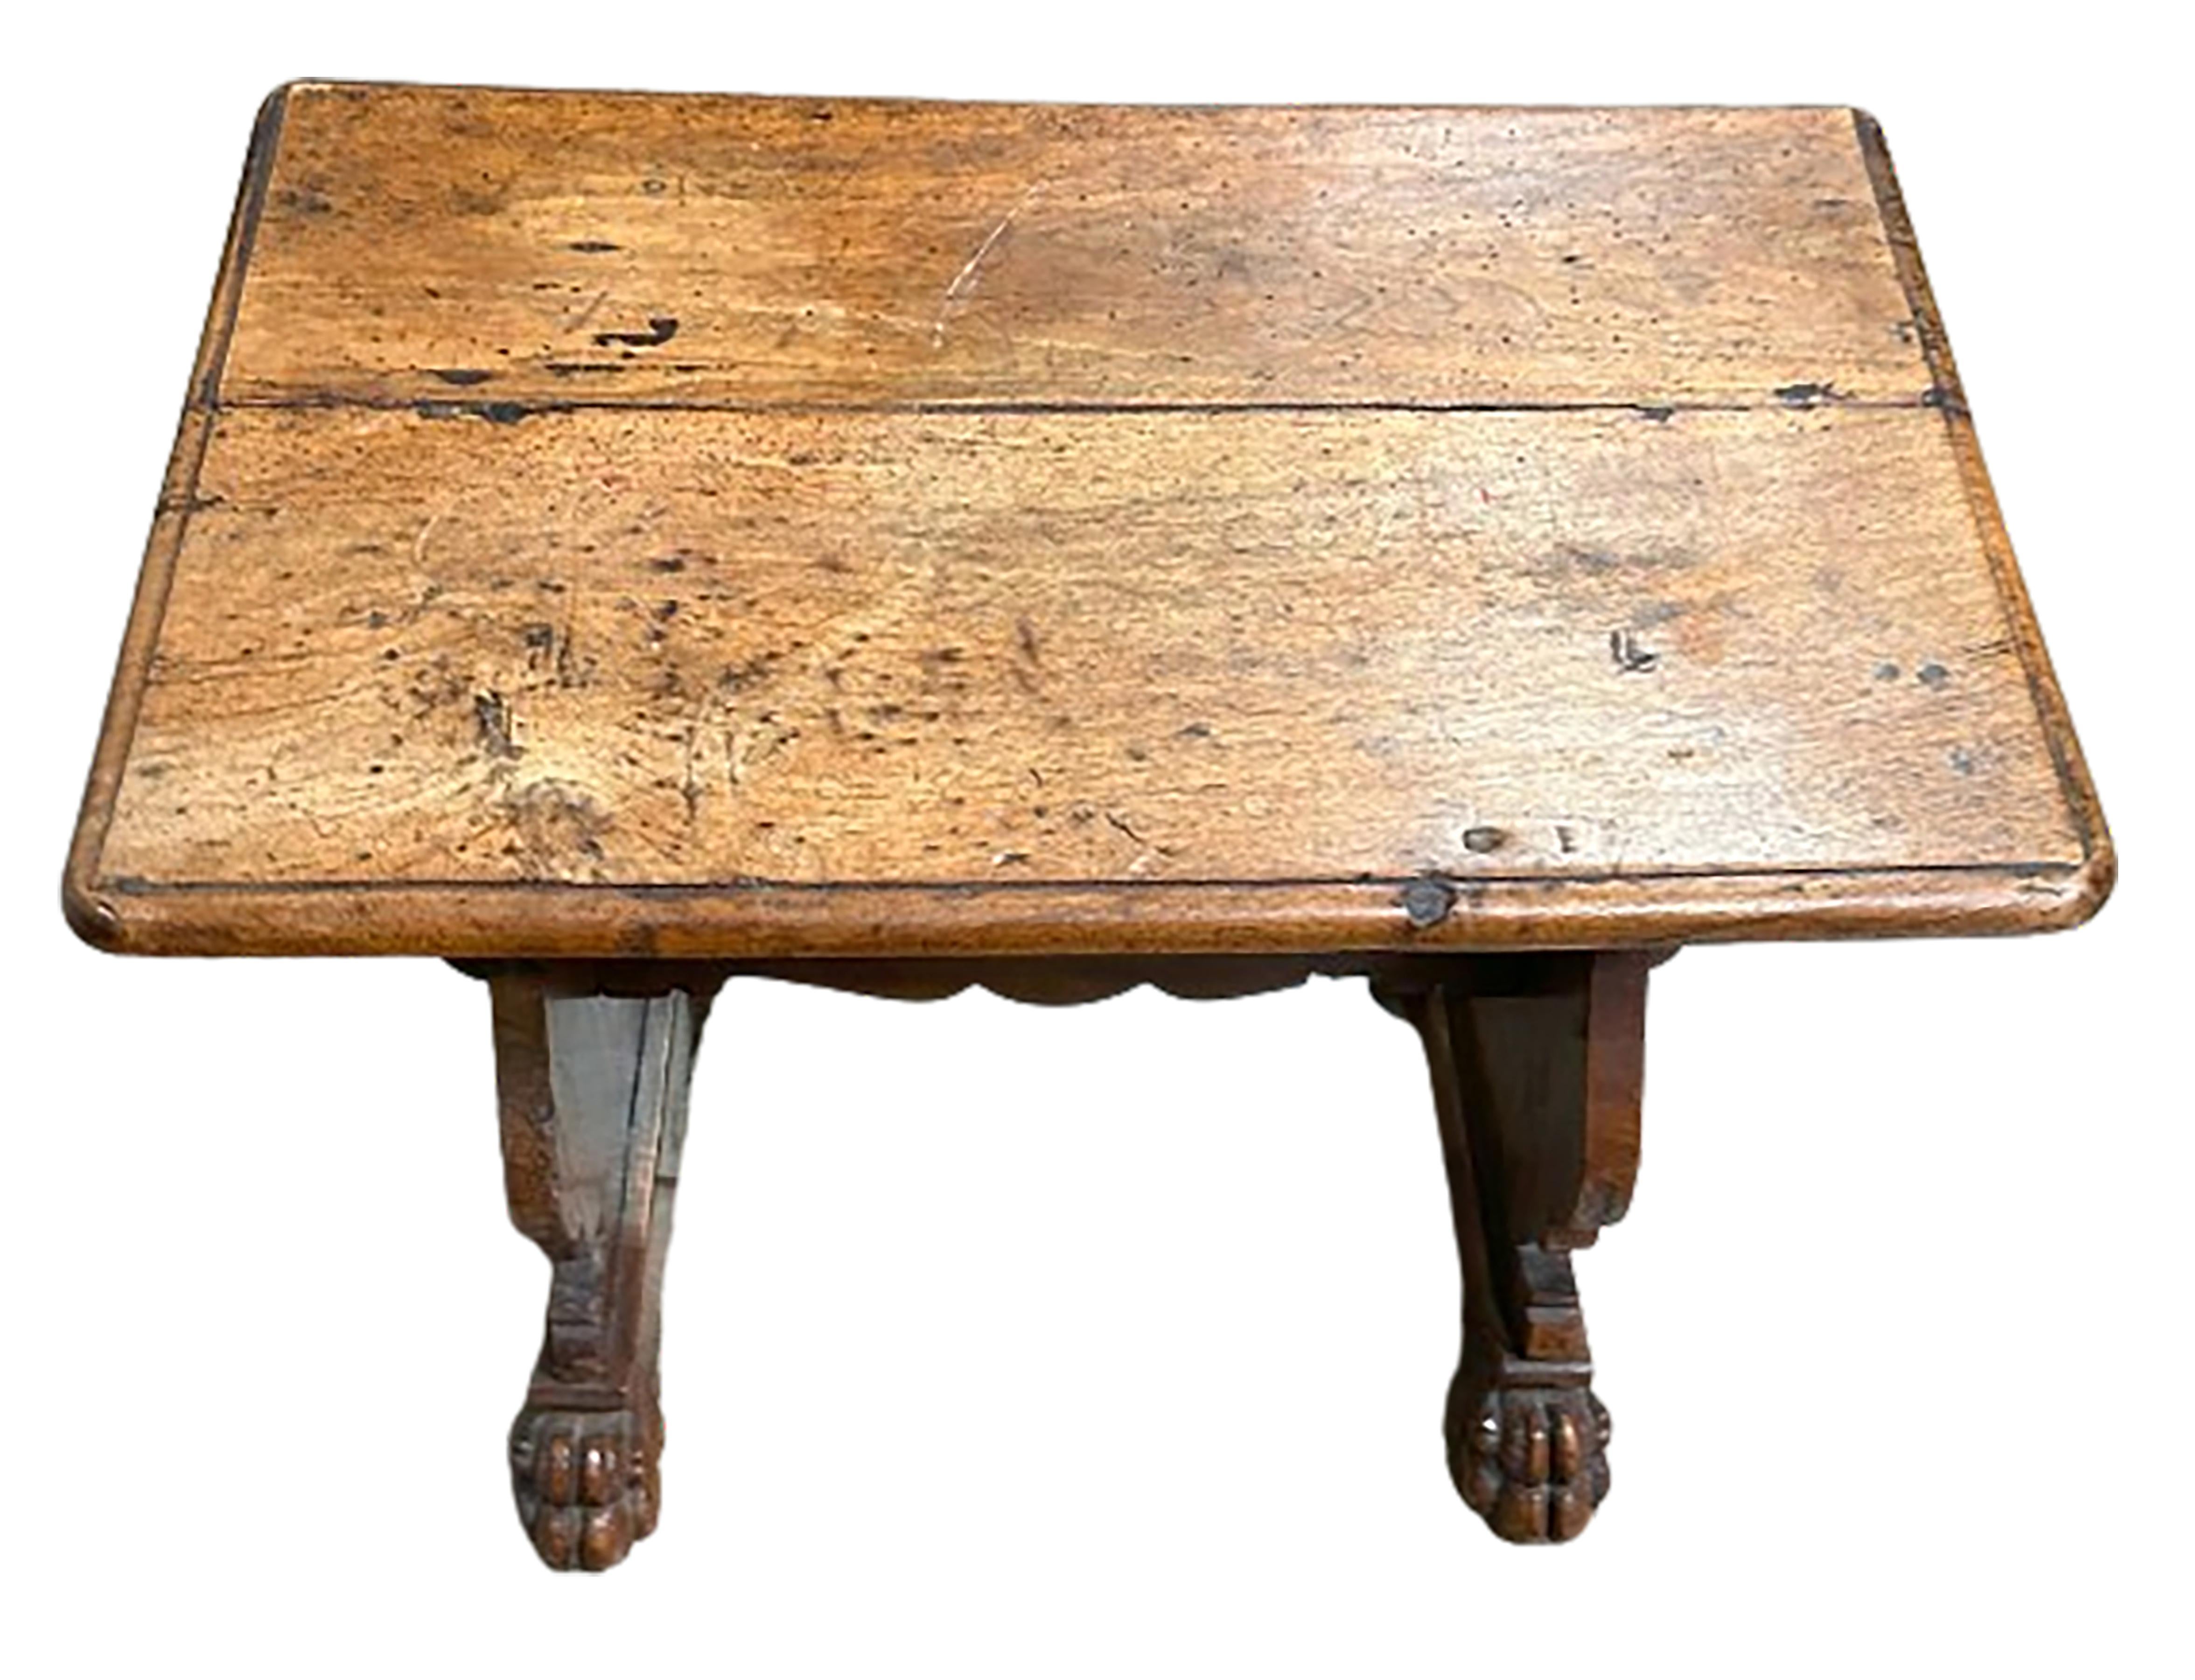 A handsome 19th century Italian walnut side table. Top is made up of two boards. Sides are joined with two lions paw feet at either side of the bottom. Deep patinated finish. 

In good condition. Some gentle wear consistent with age and use.

No